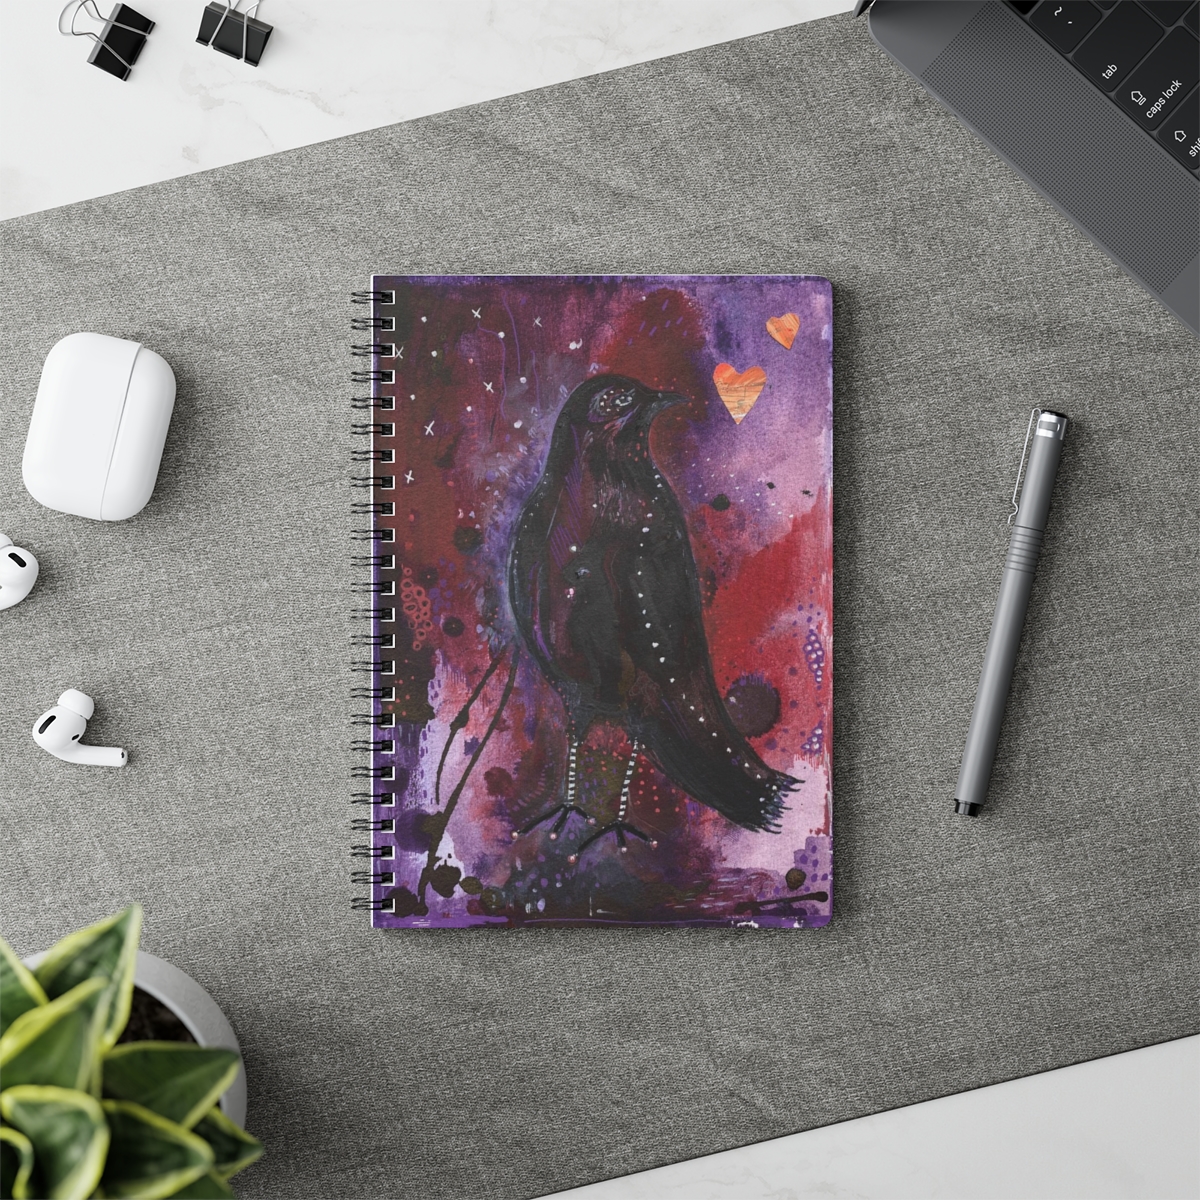 Special notebook in context- crow design on an abstract background of purple tomes.